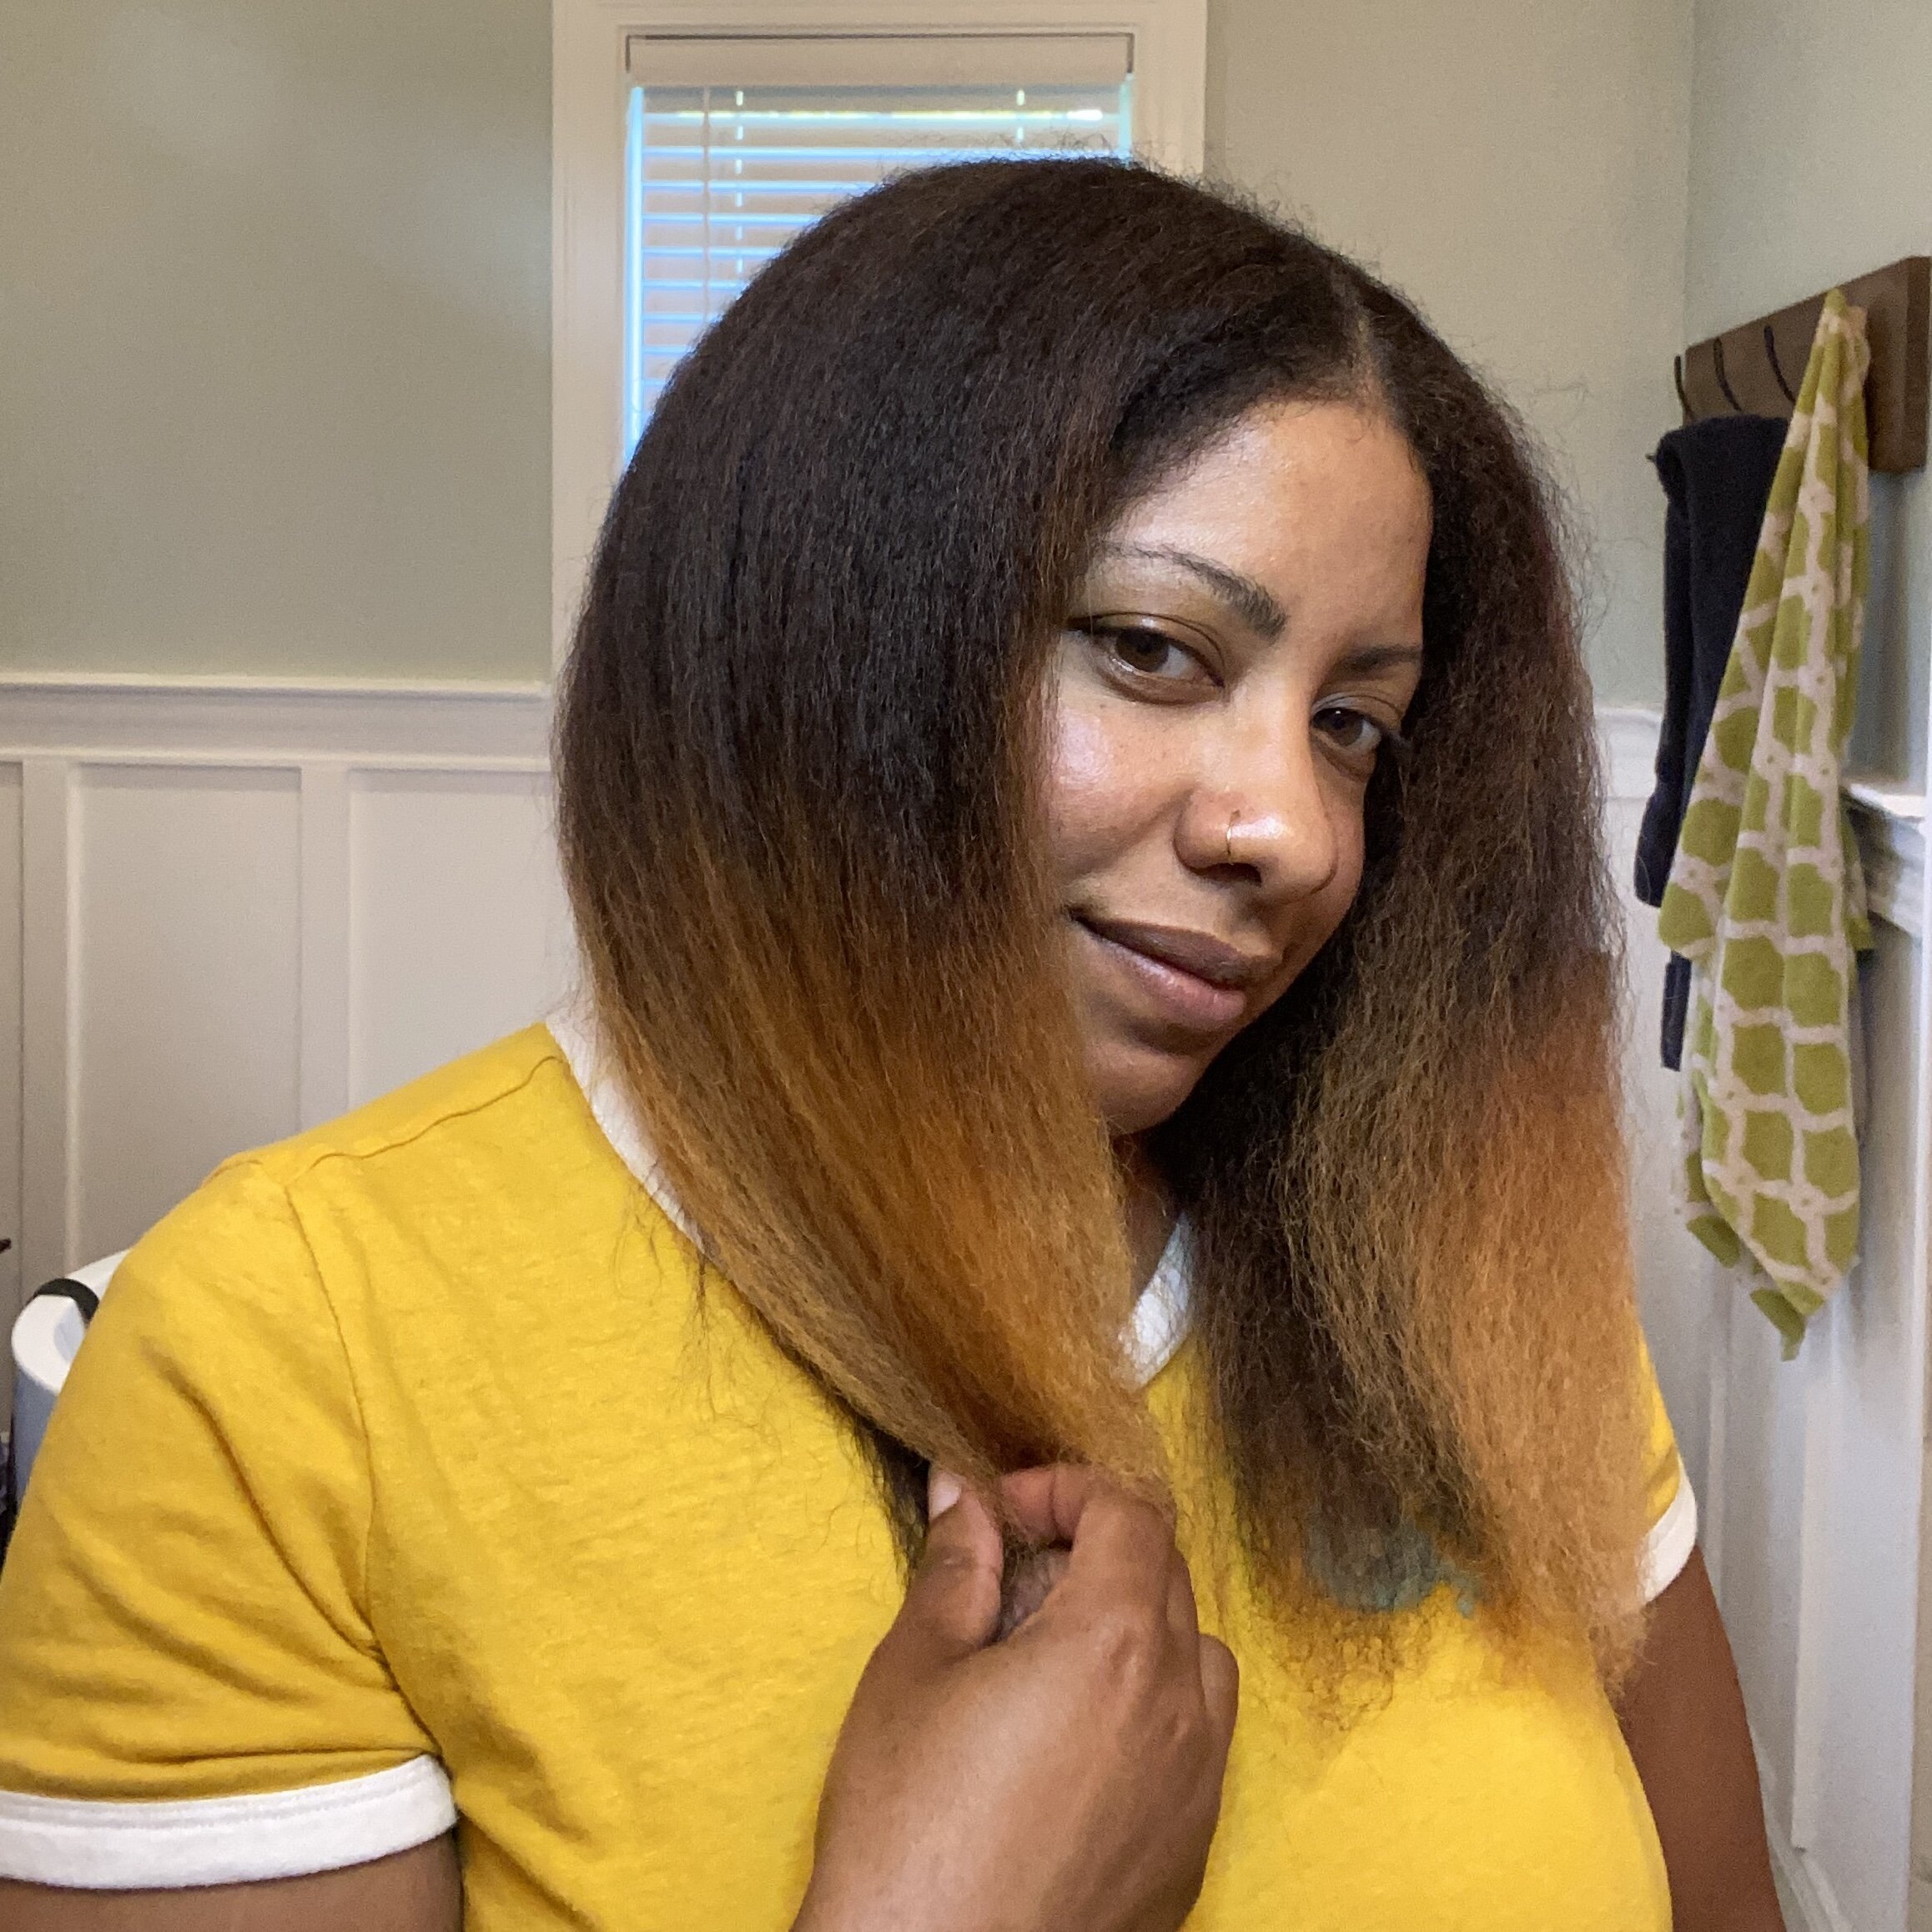 HOW TO BLOW OUTBLOW DRY ON NATURAL HAIR FOR BLACK MEN  SHORT TO LONG HAIR  REAL QUICK  TYPE 4ABC  YouTube